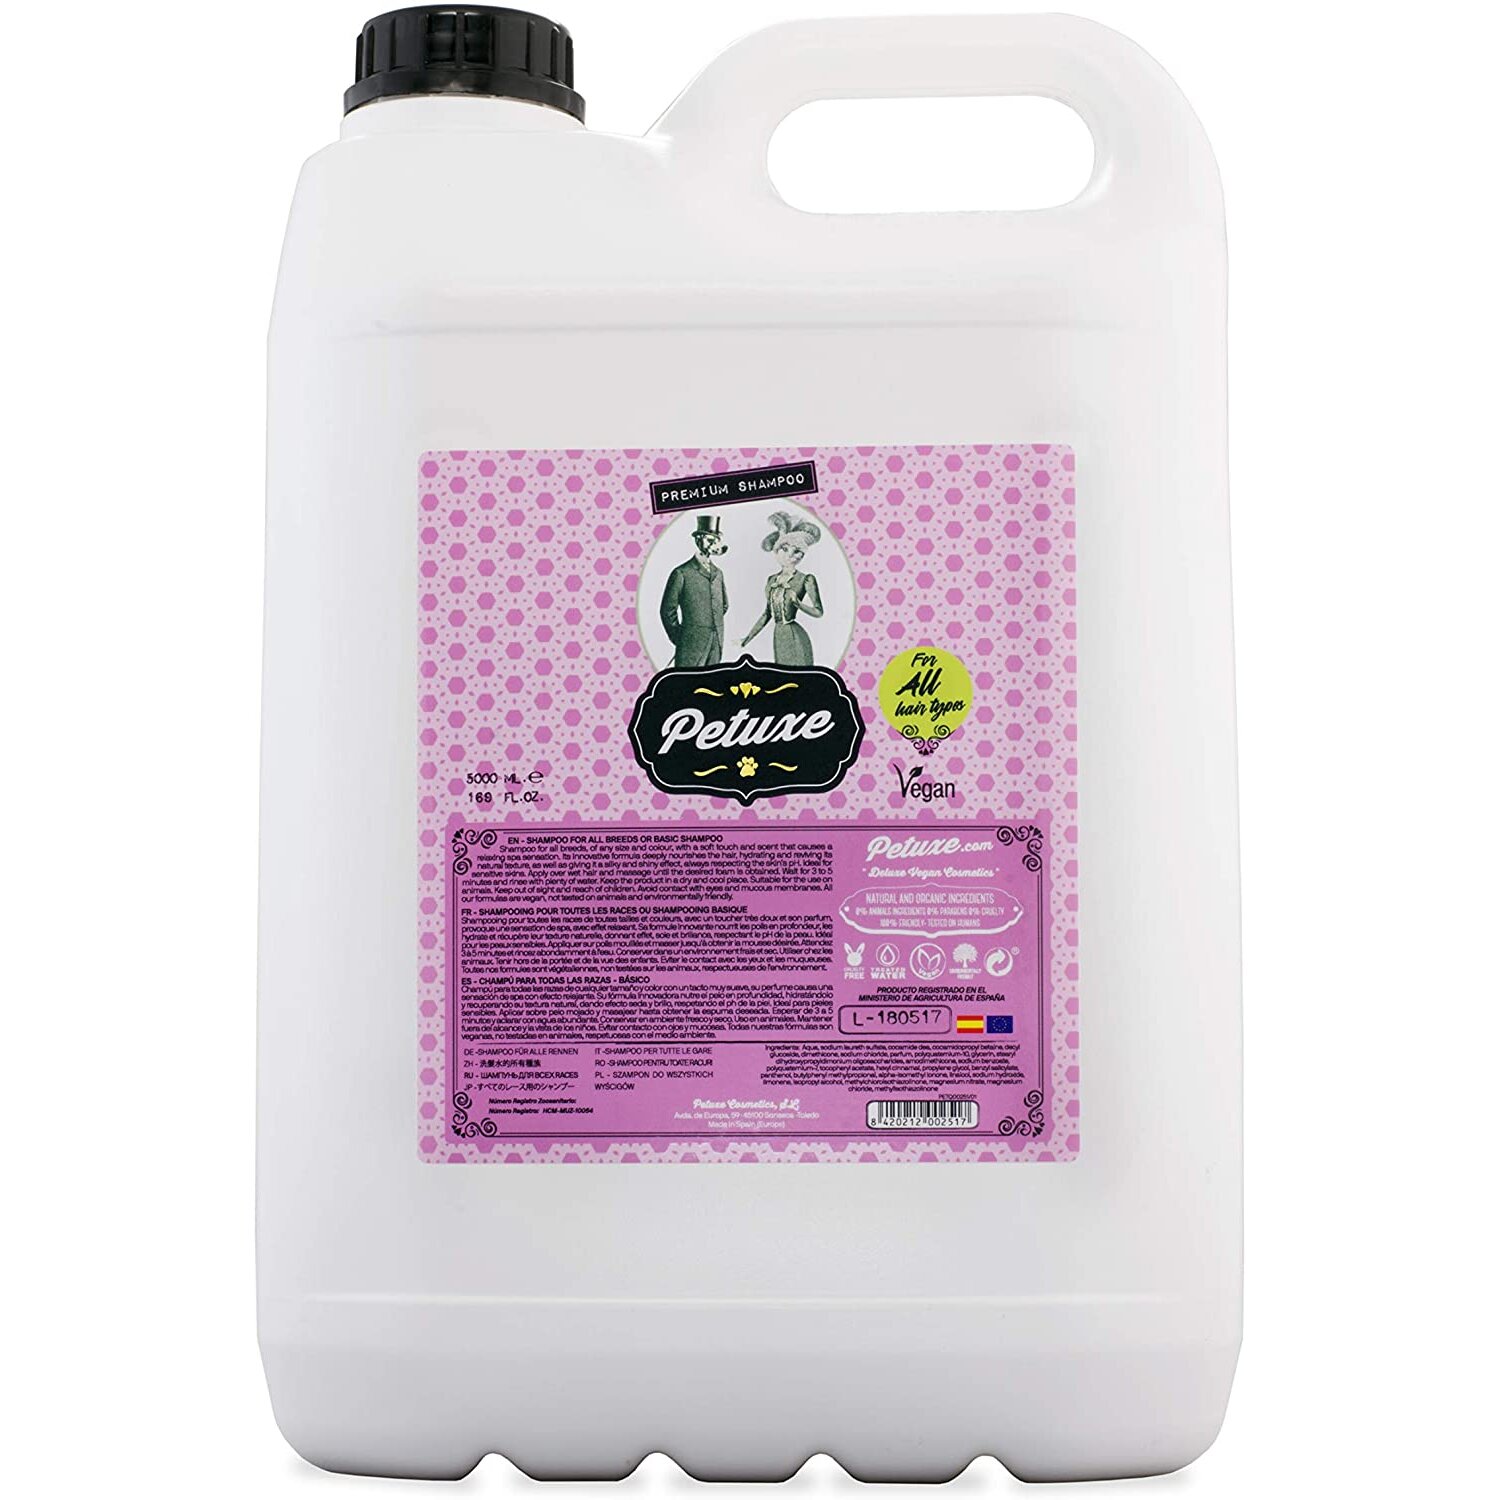 Petuxe 00251 Vegan Shampoo for Dogs and Pets, All Hair Types 鈥 5000 ml